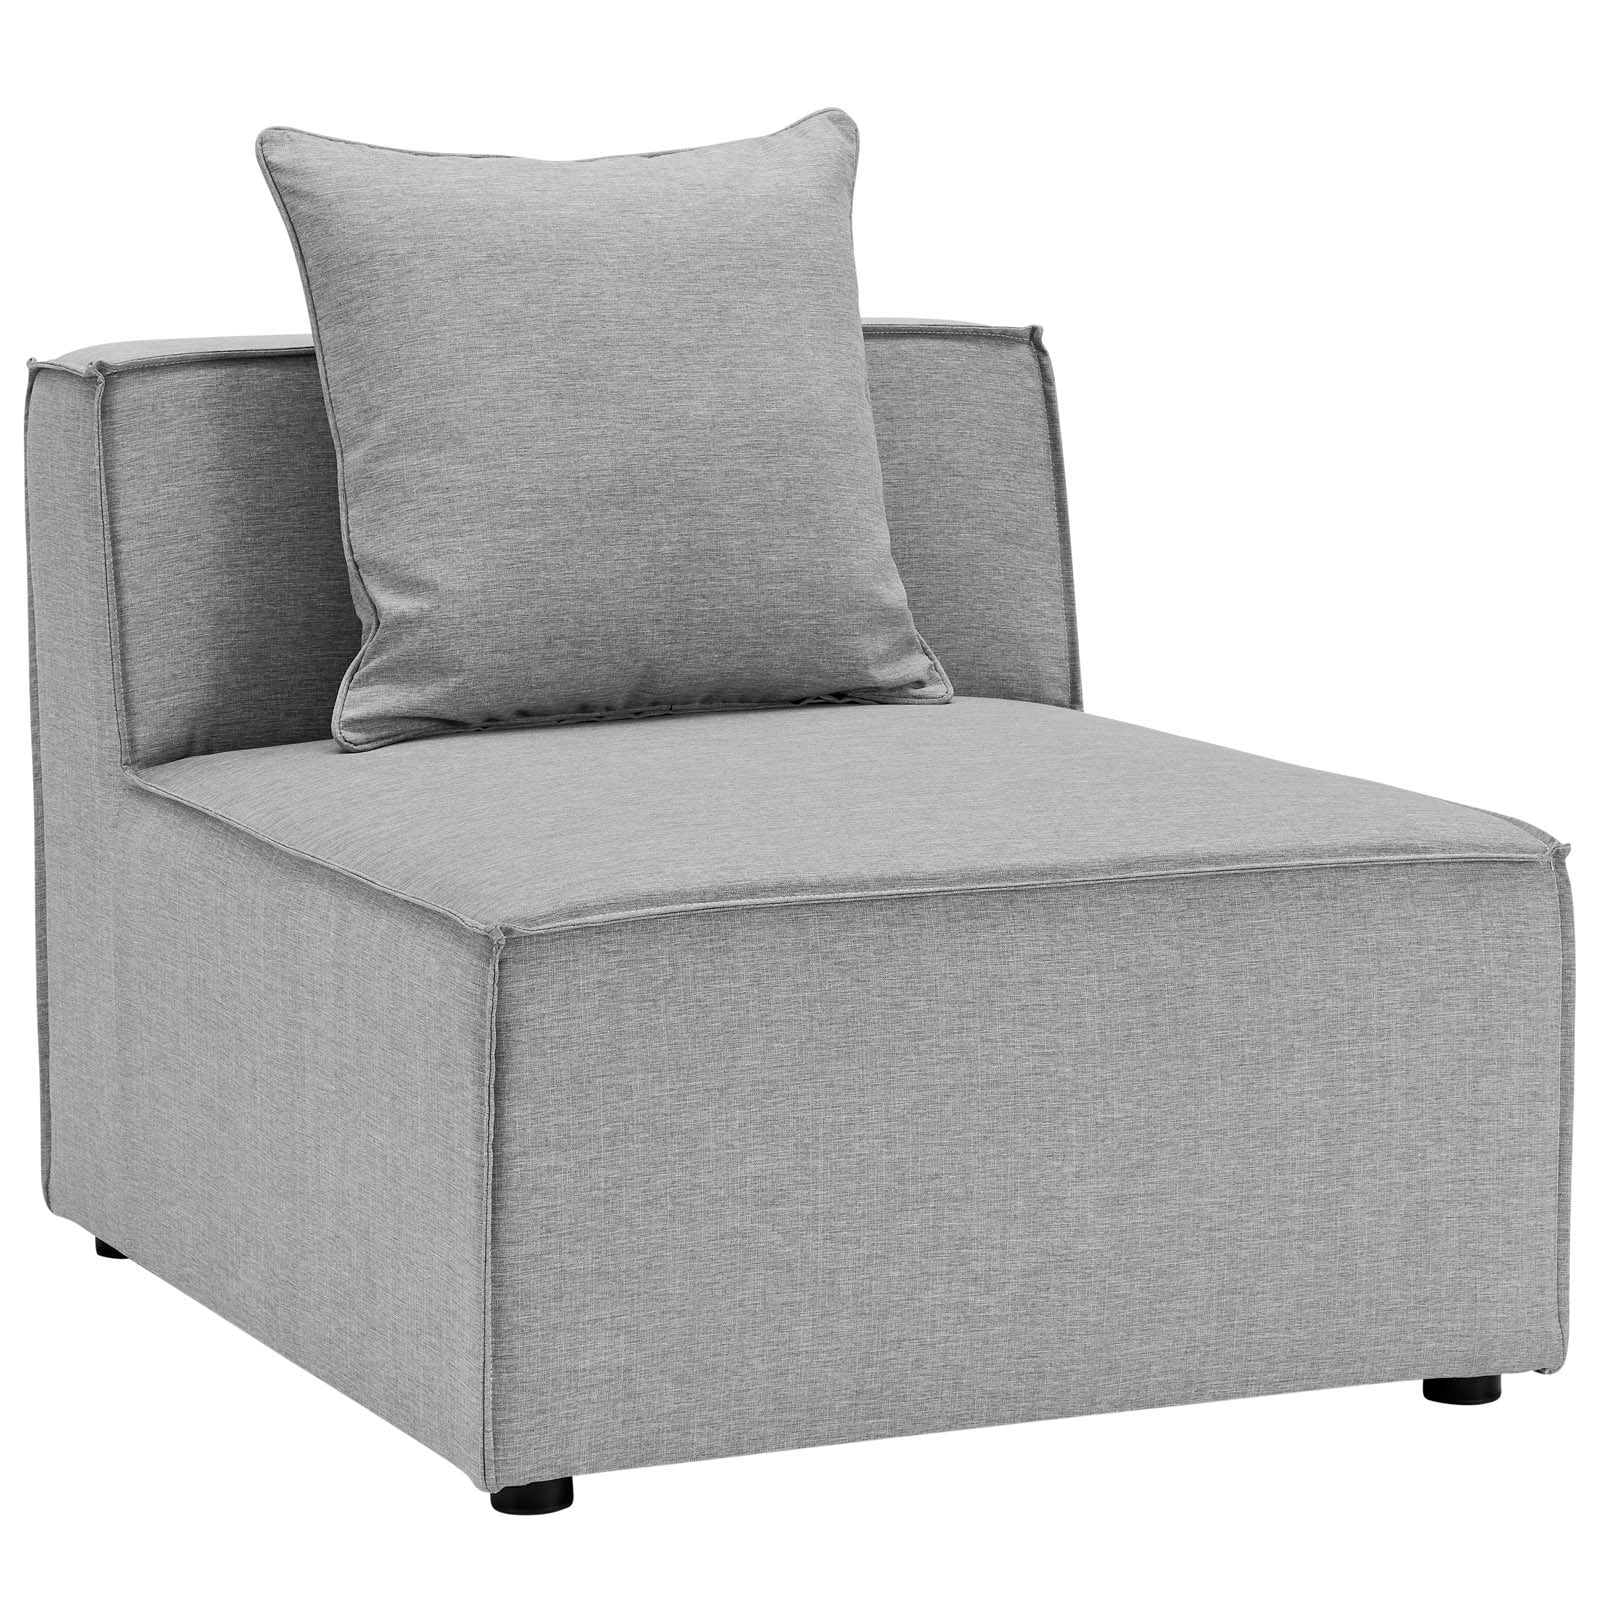 Saybrook Outdoor Patio Upholstered 6-Piece Sectional Sofa - East Shore Modern Home Furnishings